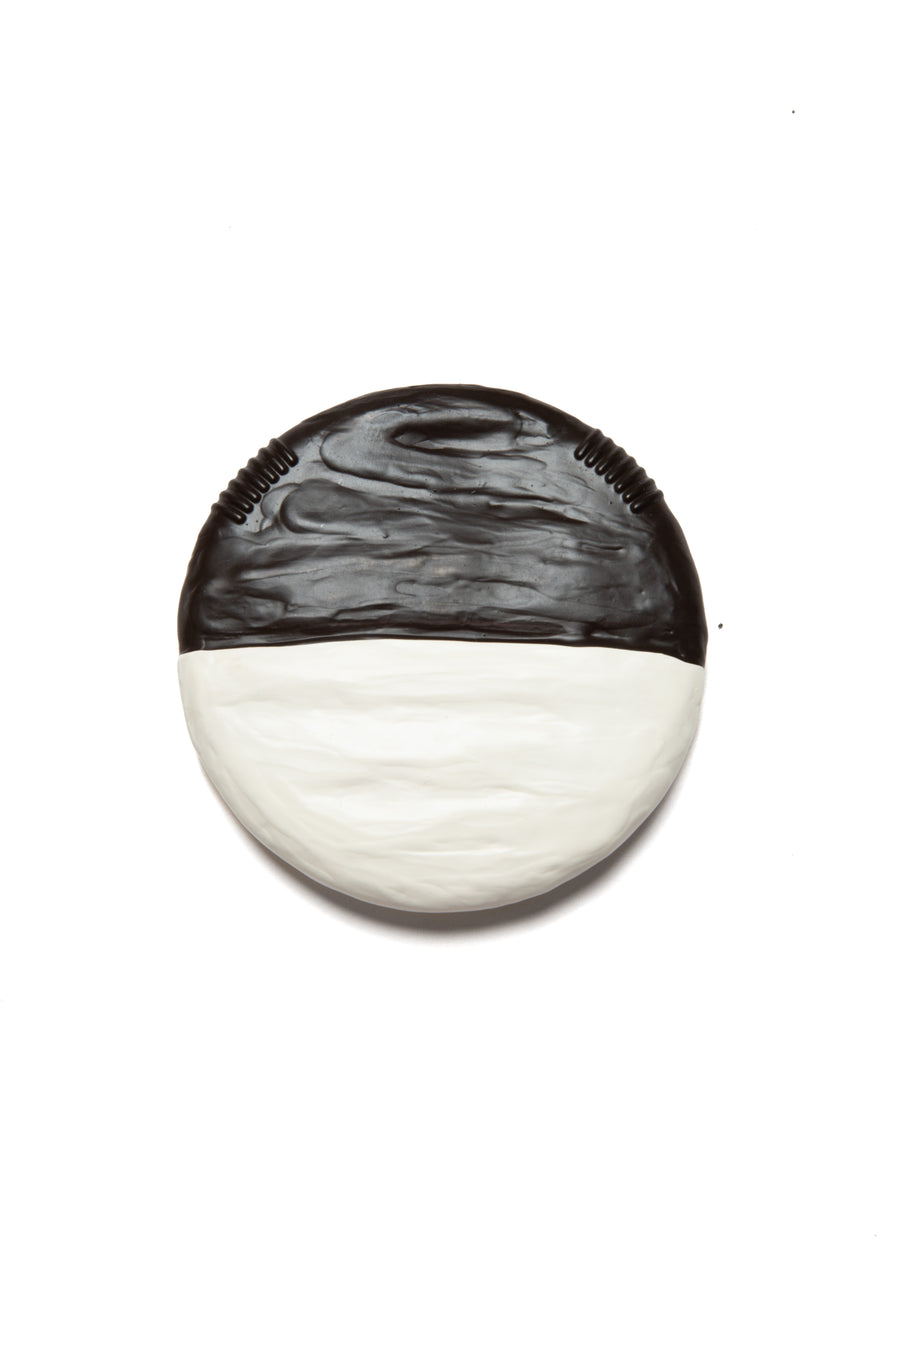 Bubbies Black & White Cookie Teether